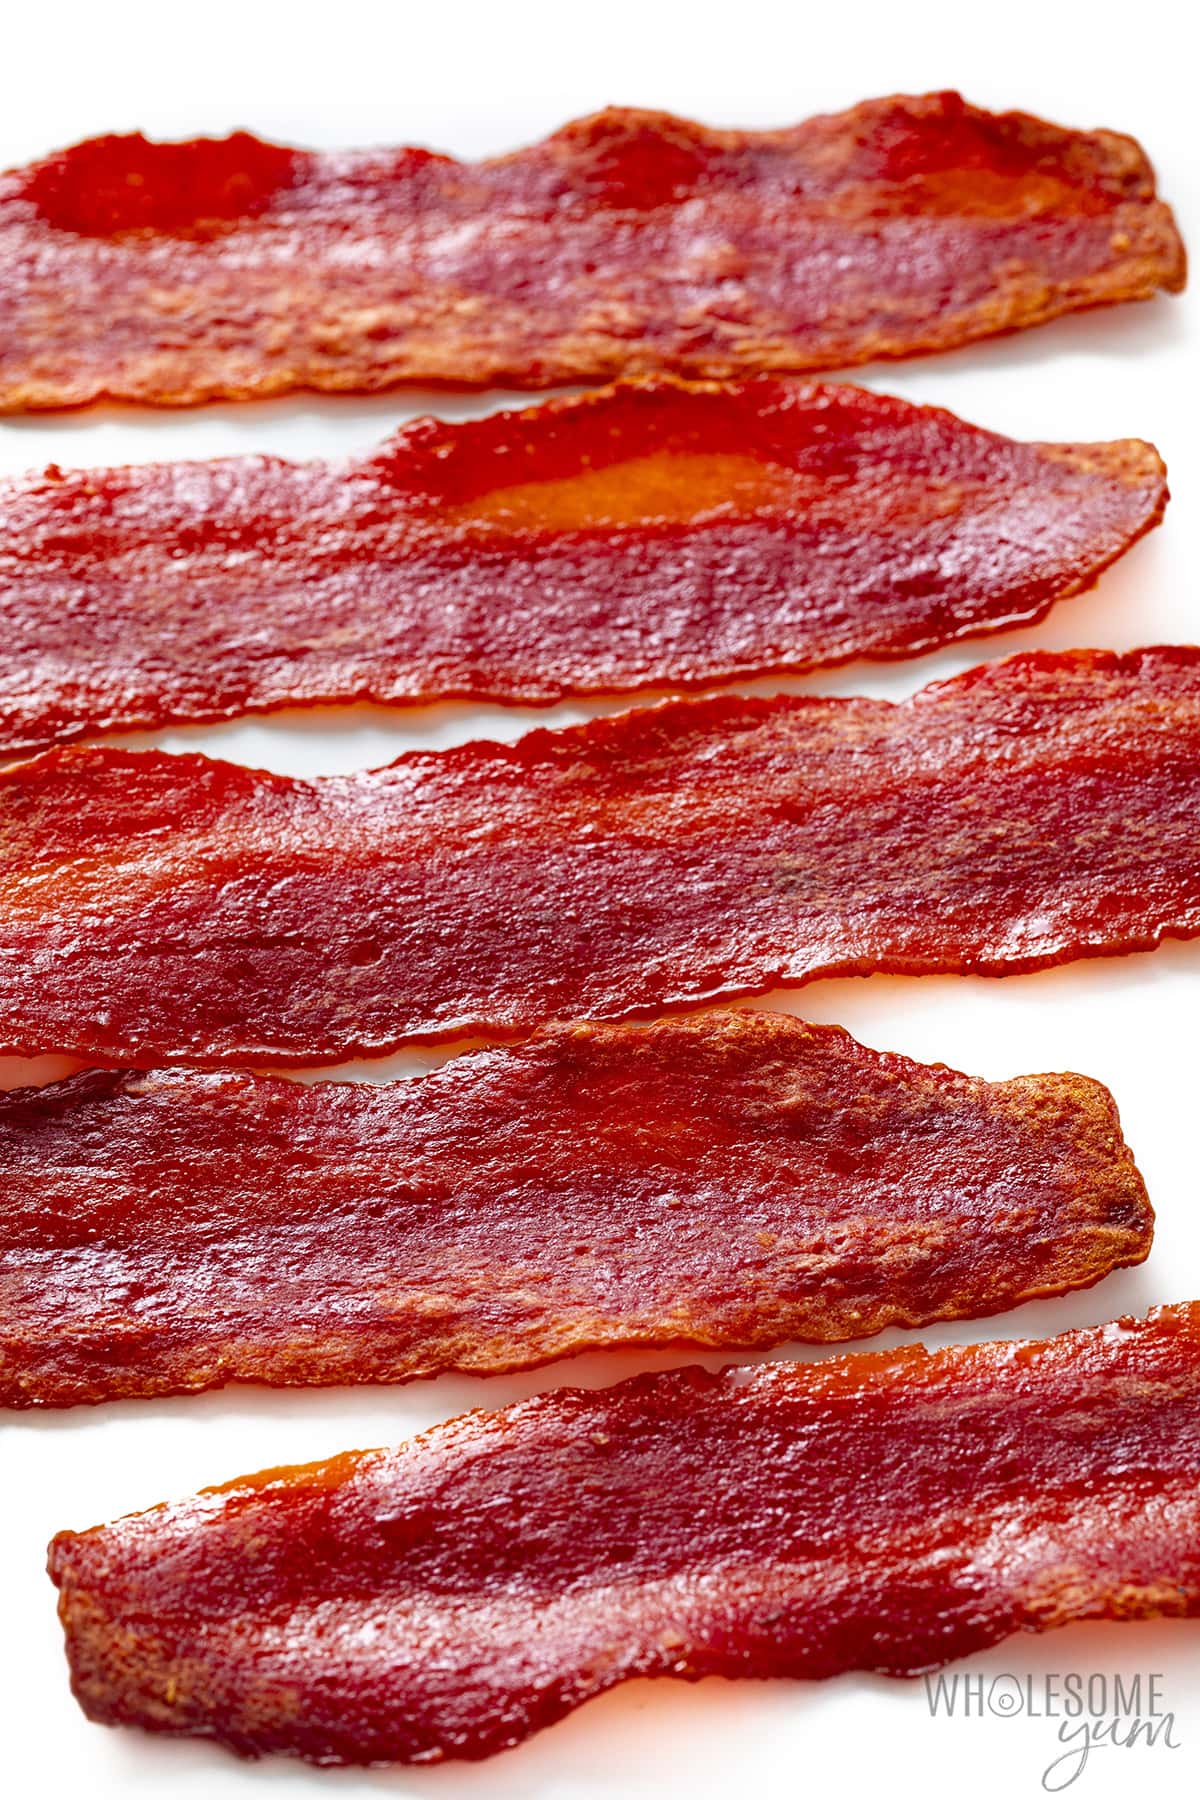 Slices of turkey bacon in the oven on a white background.